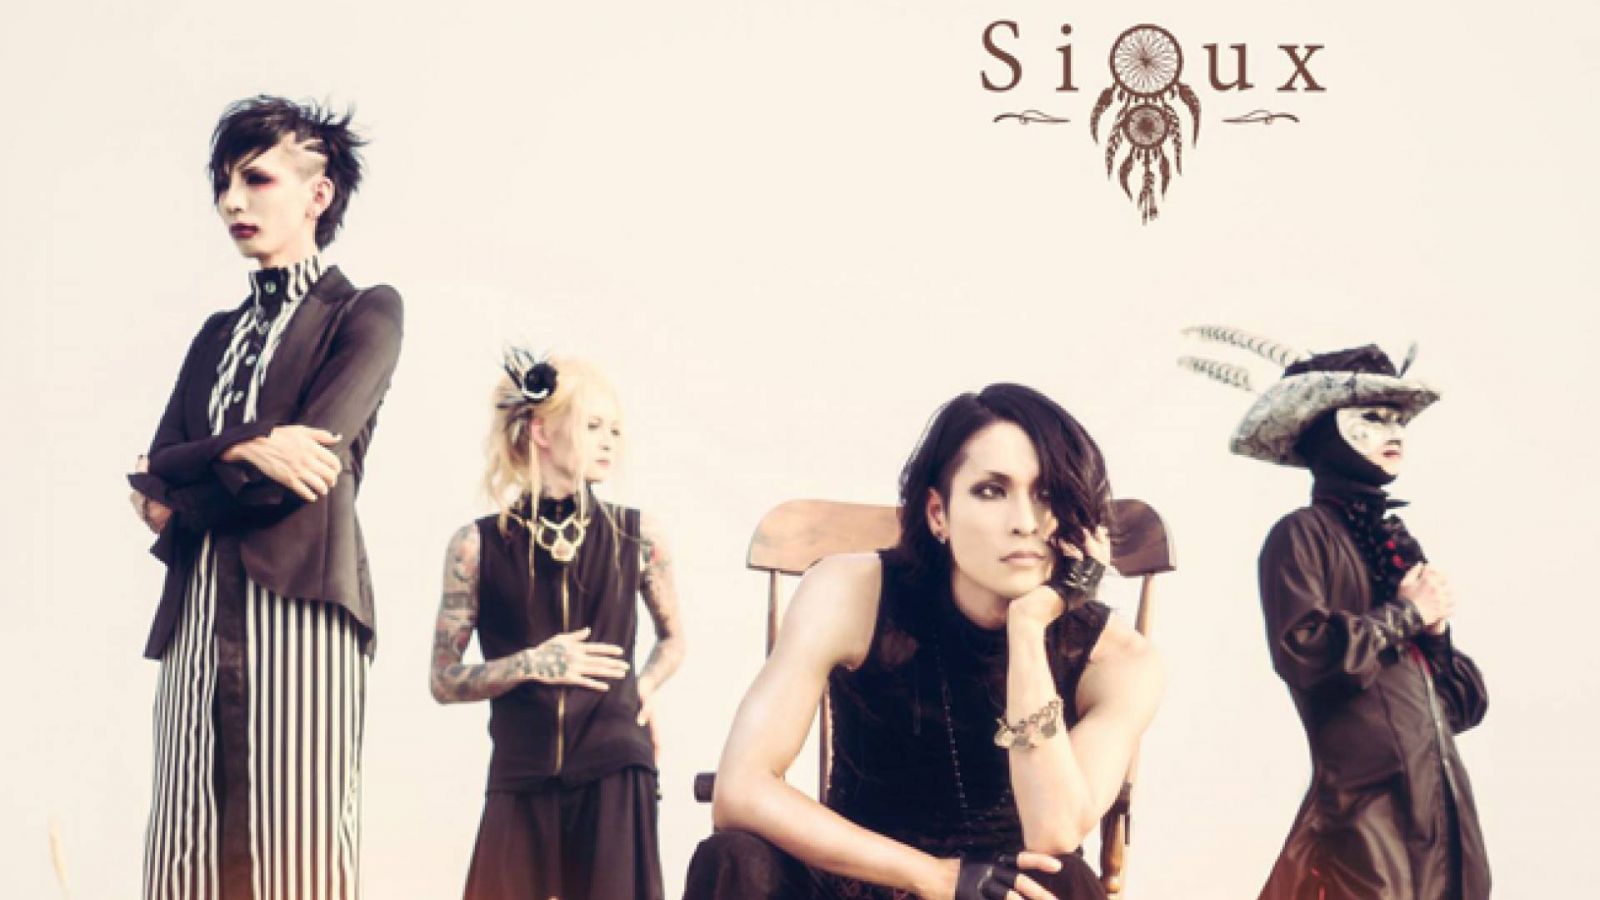 Sioux to Disband © Sioux. All rights reserved.